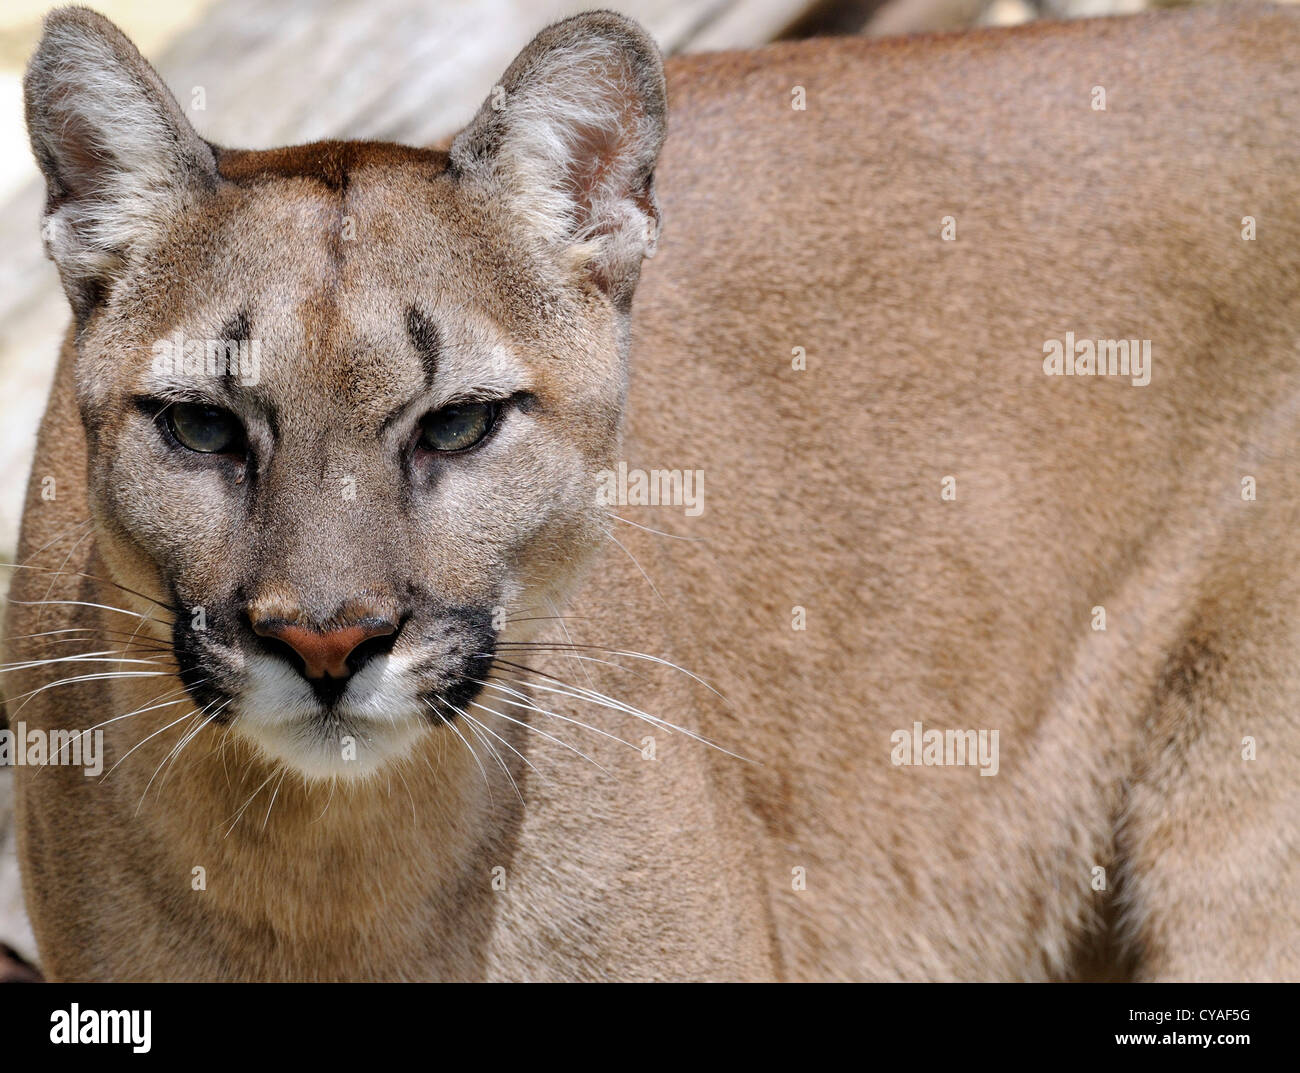 Mountain Lion (Puma concolor), also known as the cougar, puma, mountain lion, panther, catamount.  Captive animal. Stock Photo